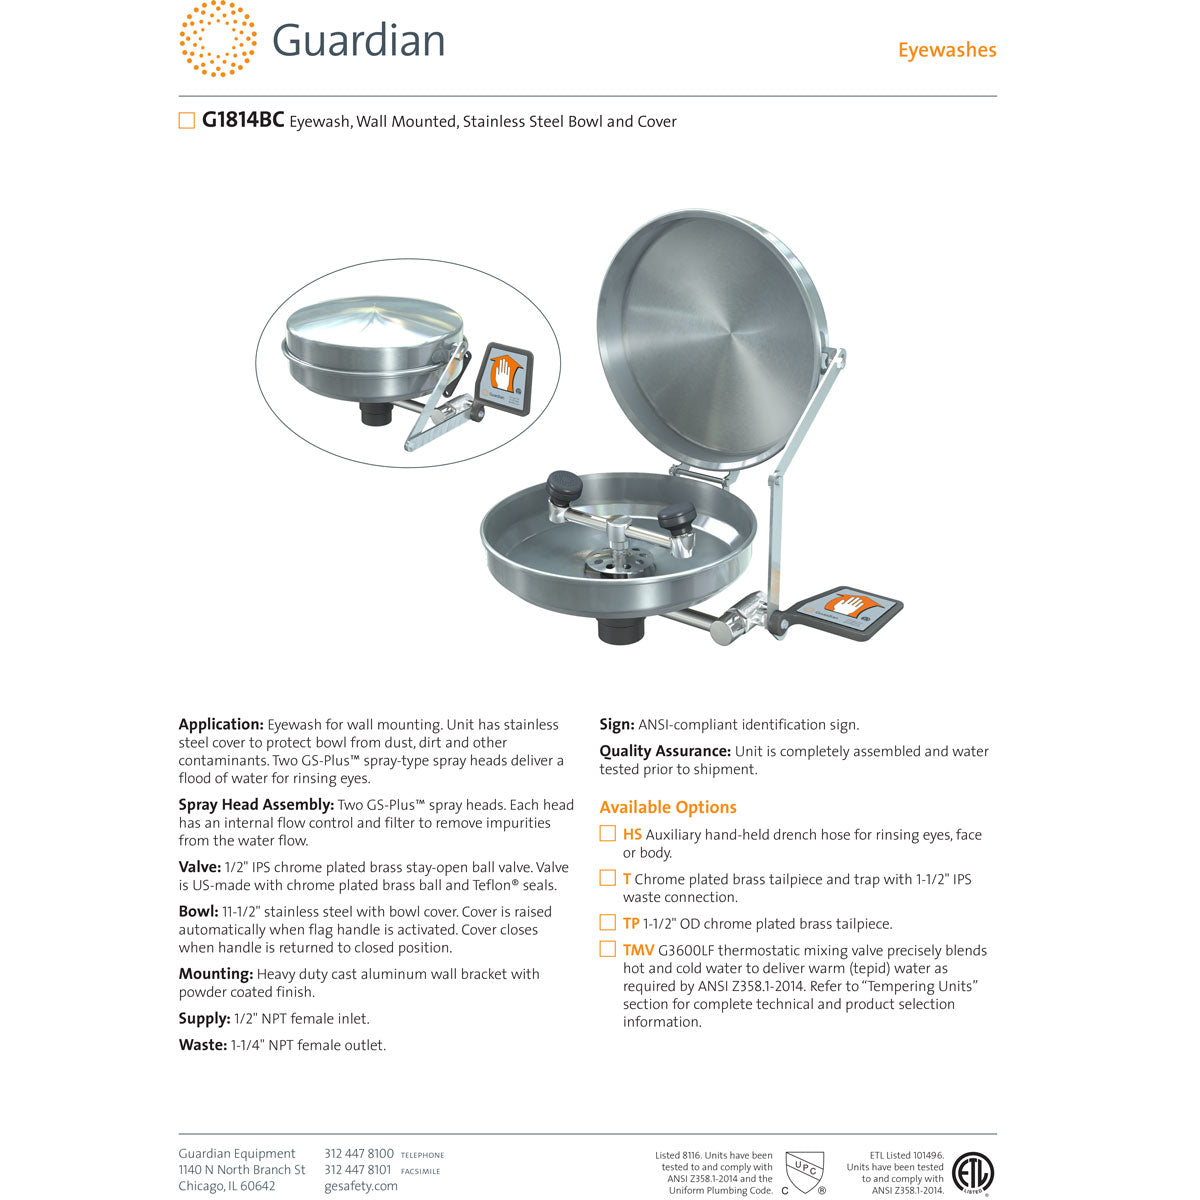 Guardian G1814BC Eyewash, Wall Mounted, Stainless Steel Bowl and Cover